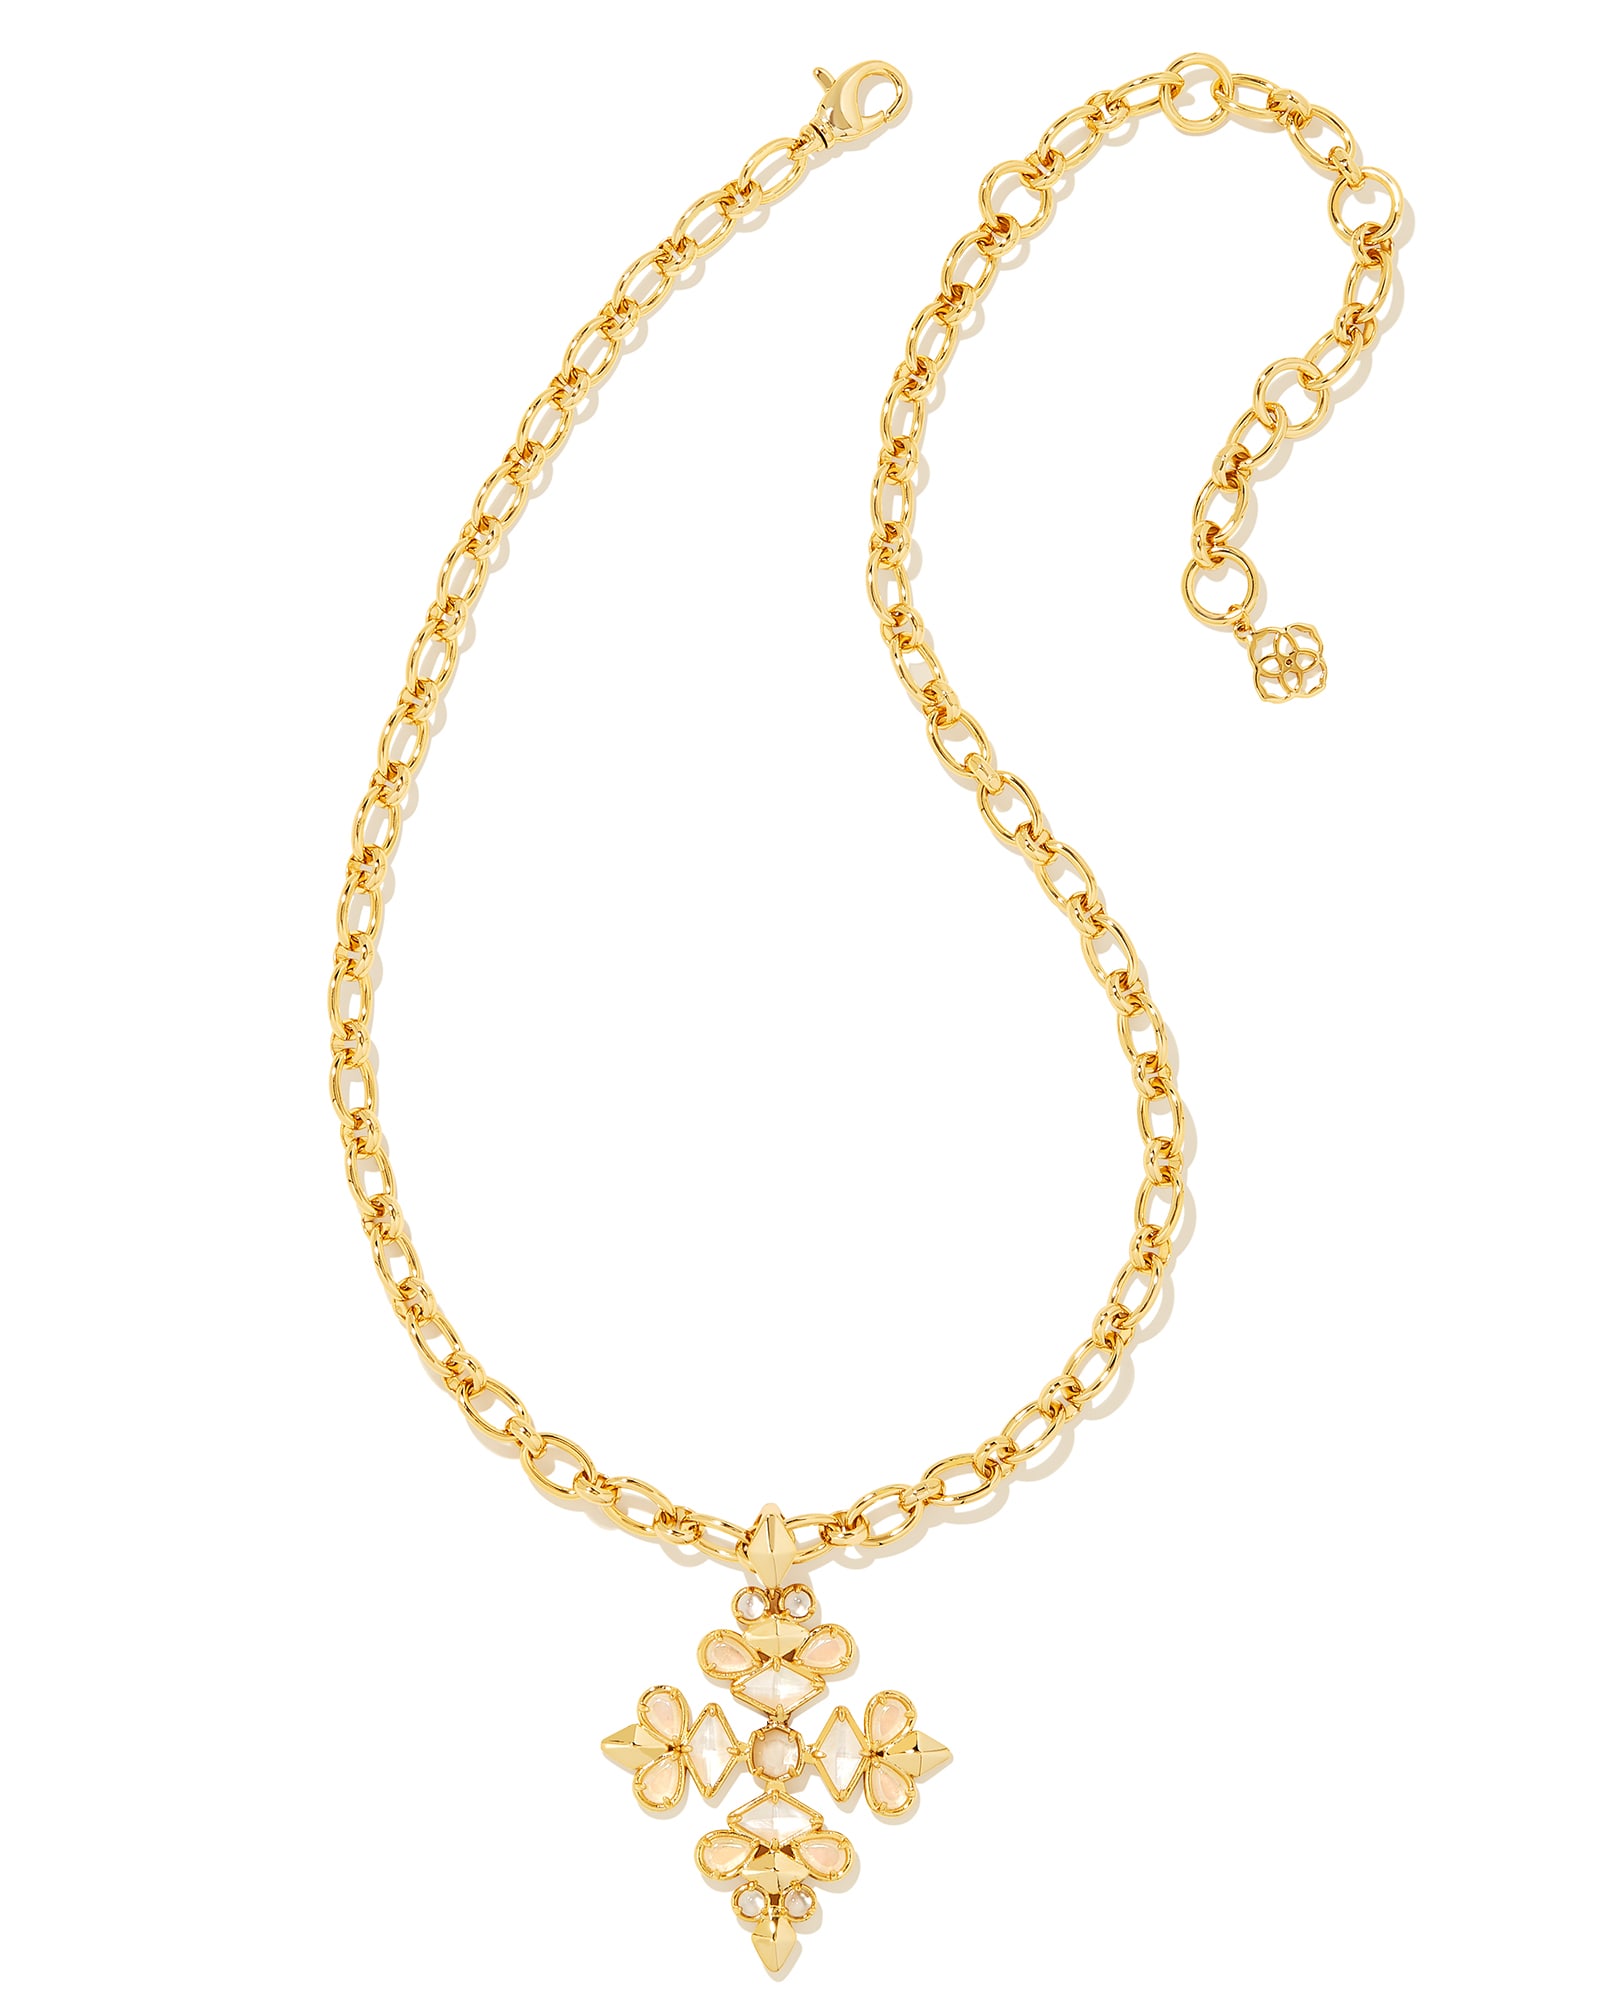 Kinsley Gold Statement Necklace in Ivory Mix | Kendra Scott